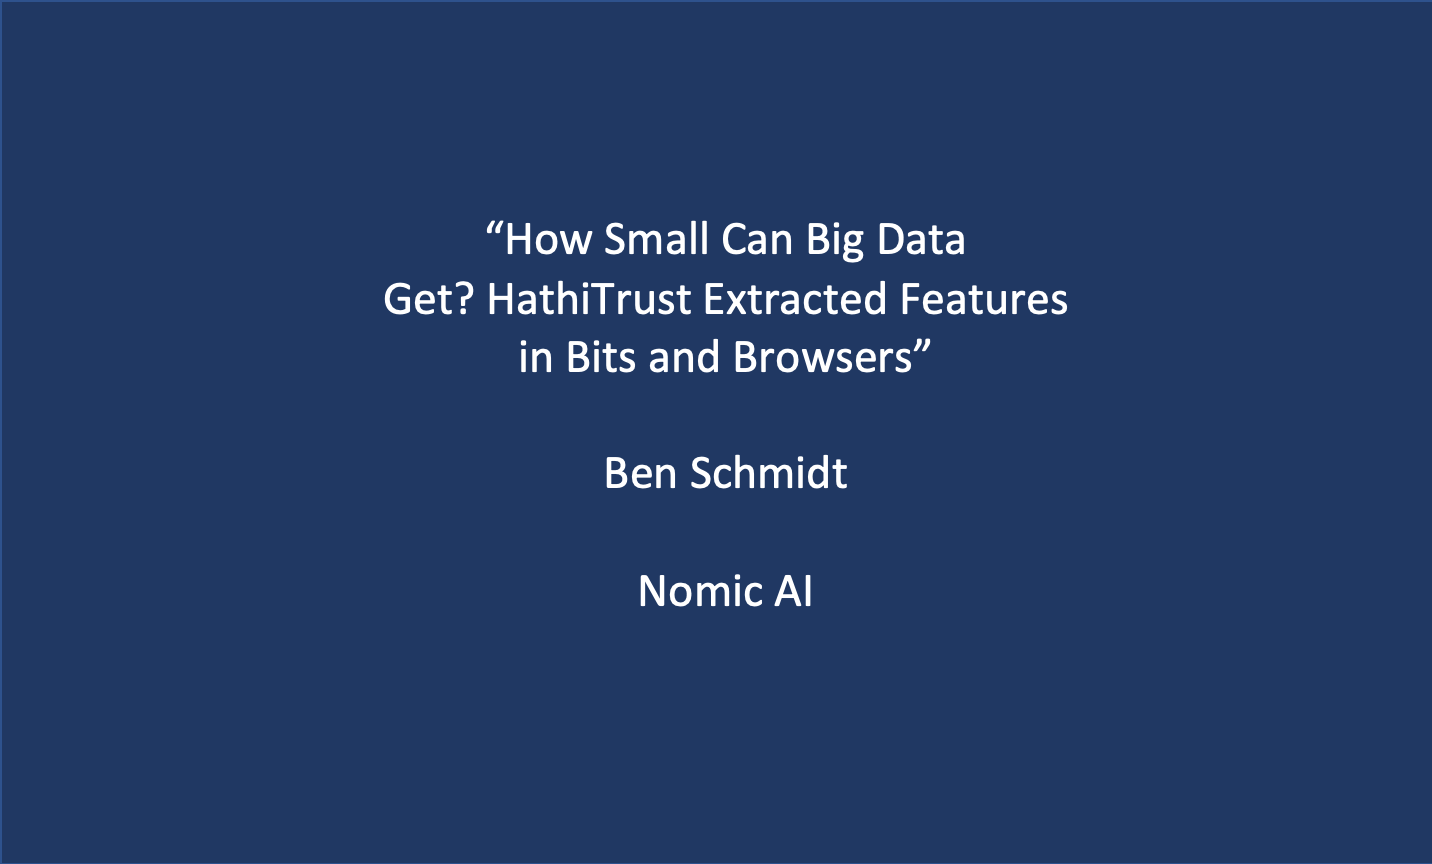 Workshop 5: Ben Schmidt, ‘How Small Can Big Data Get?  HathiTrust Extracted Features in Bits and Browsers’